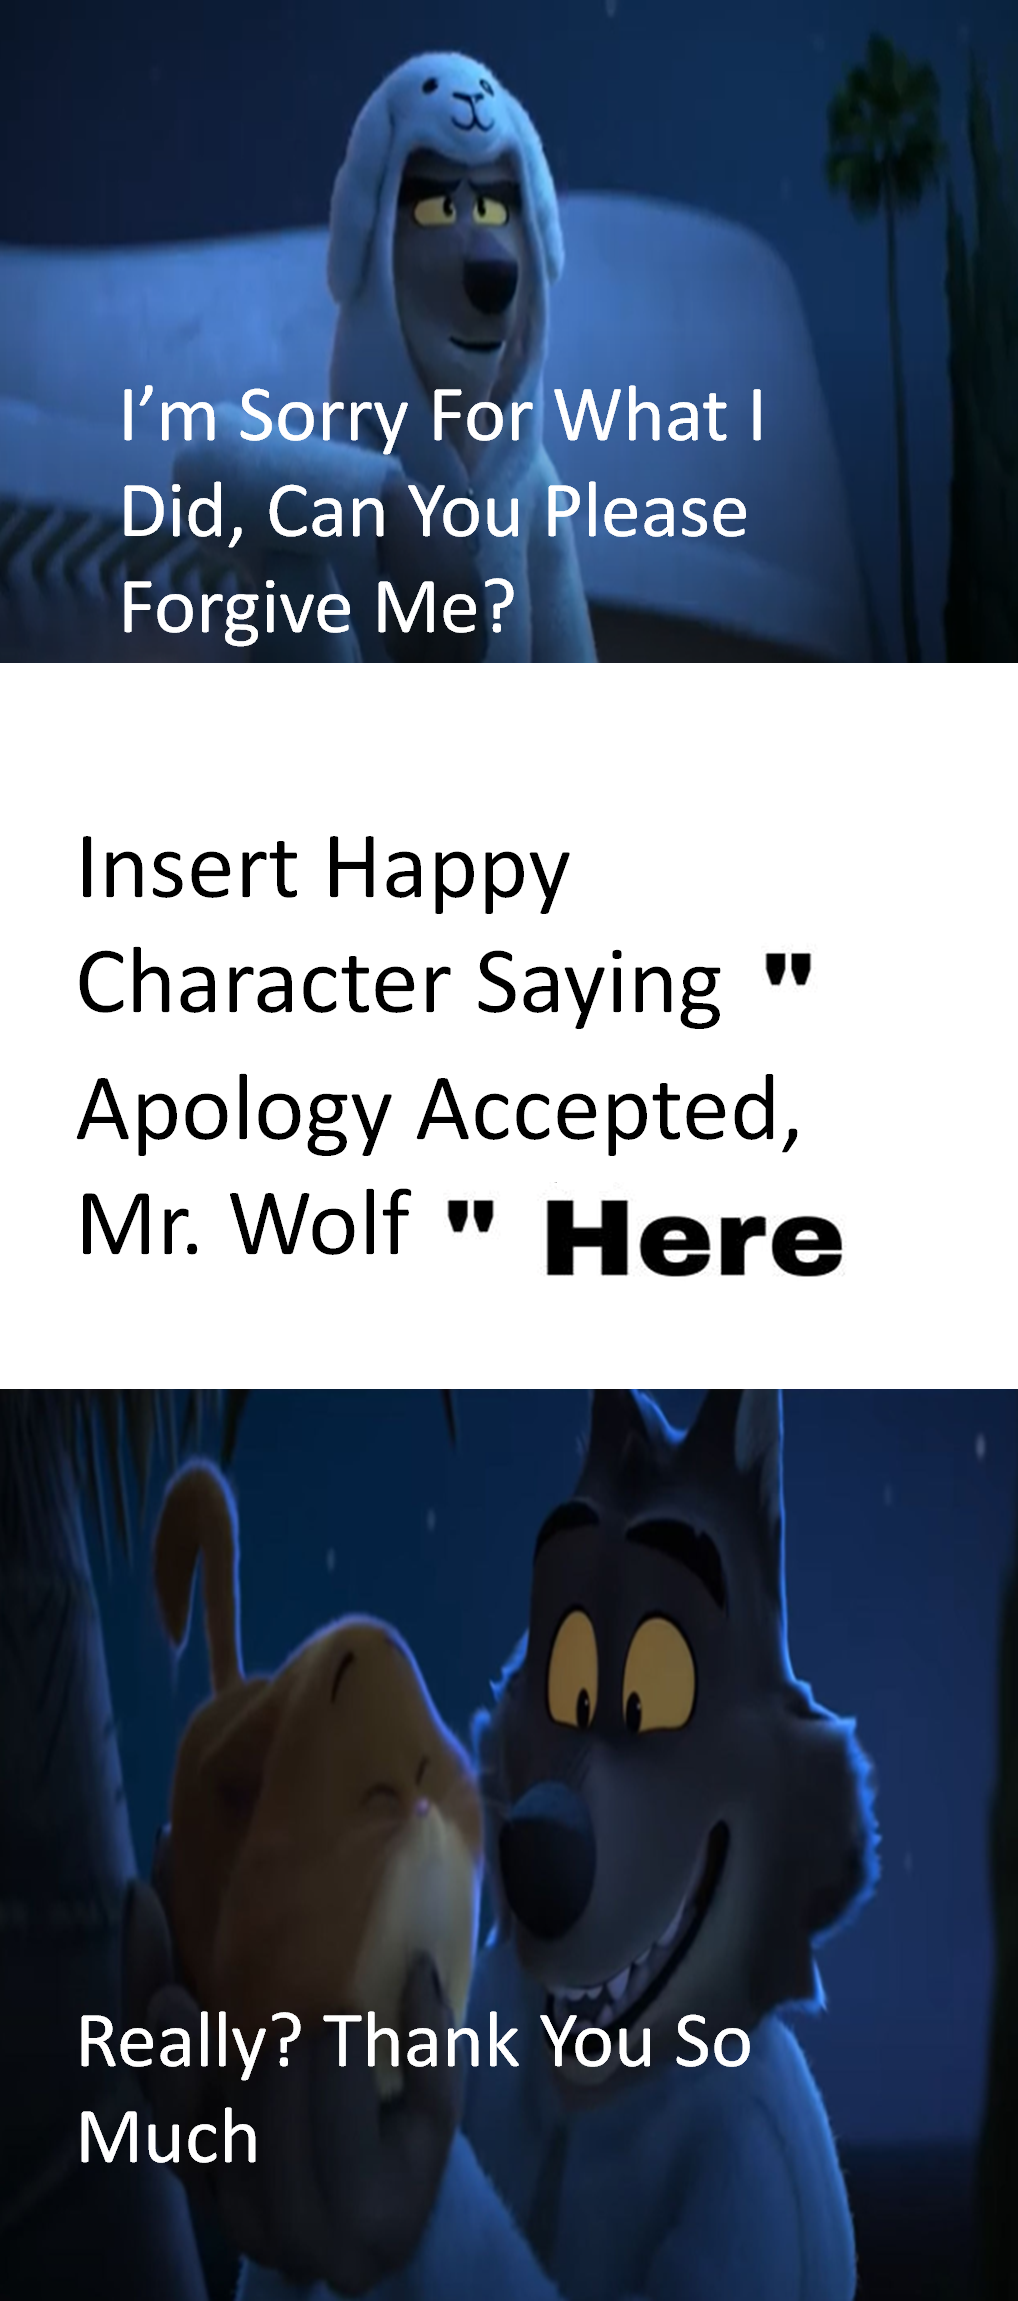 Who Accepts Mr. Wolf's Apology? by Nicolefrancesca on DeviantArt